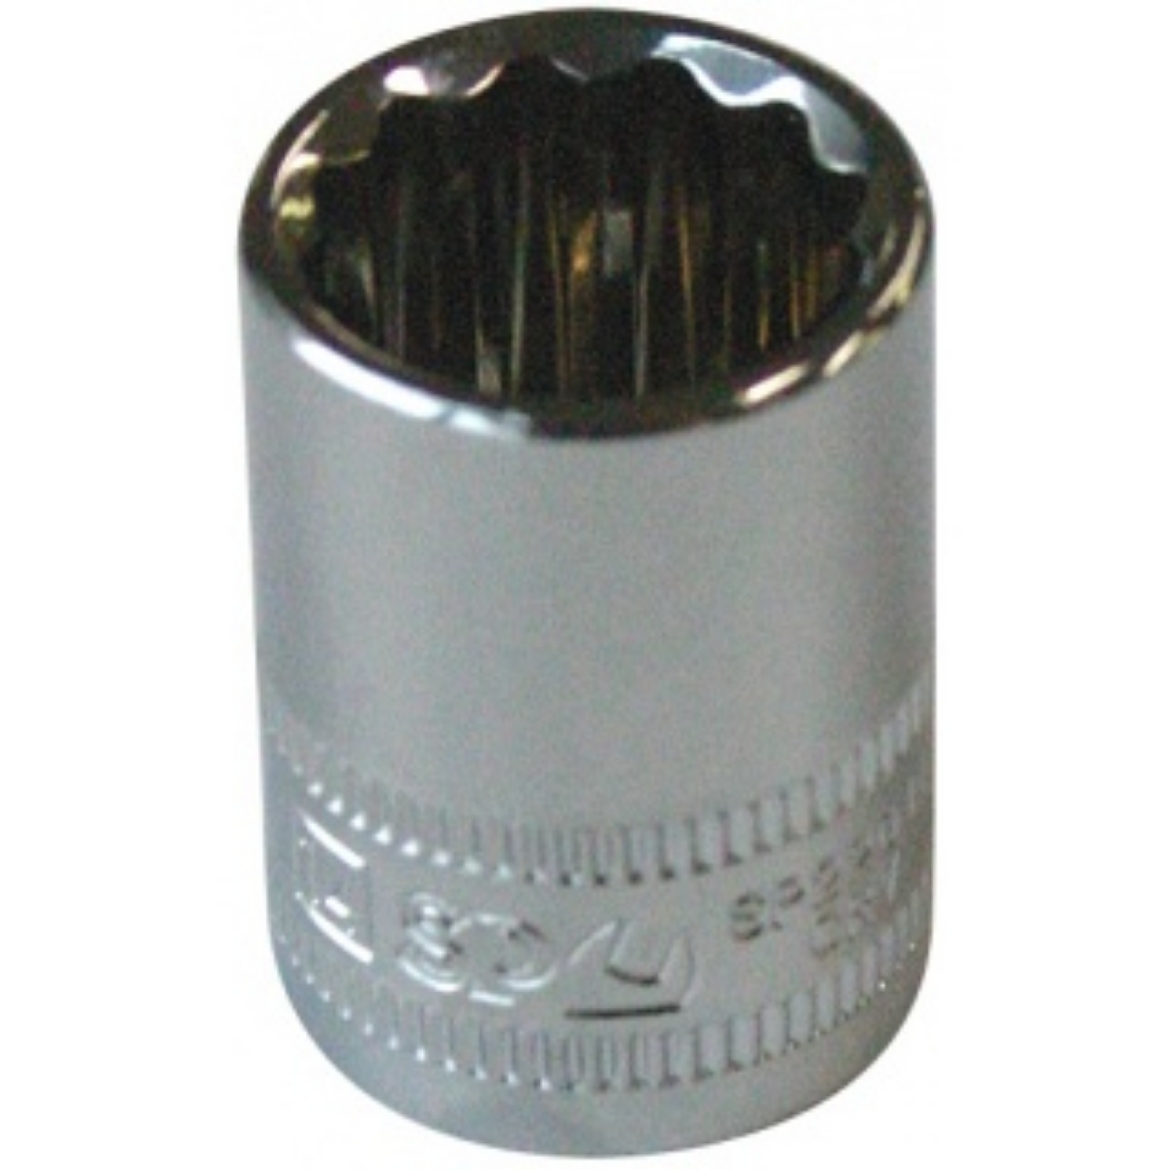 Picture of SOCKET 3/8"DR 12PT METRIC 13MM SP TOOLS